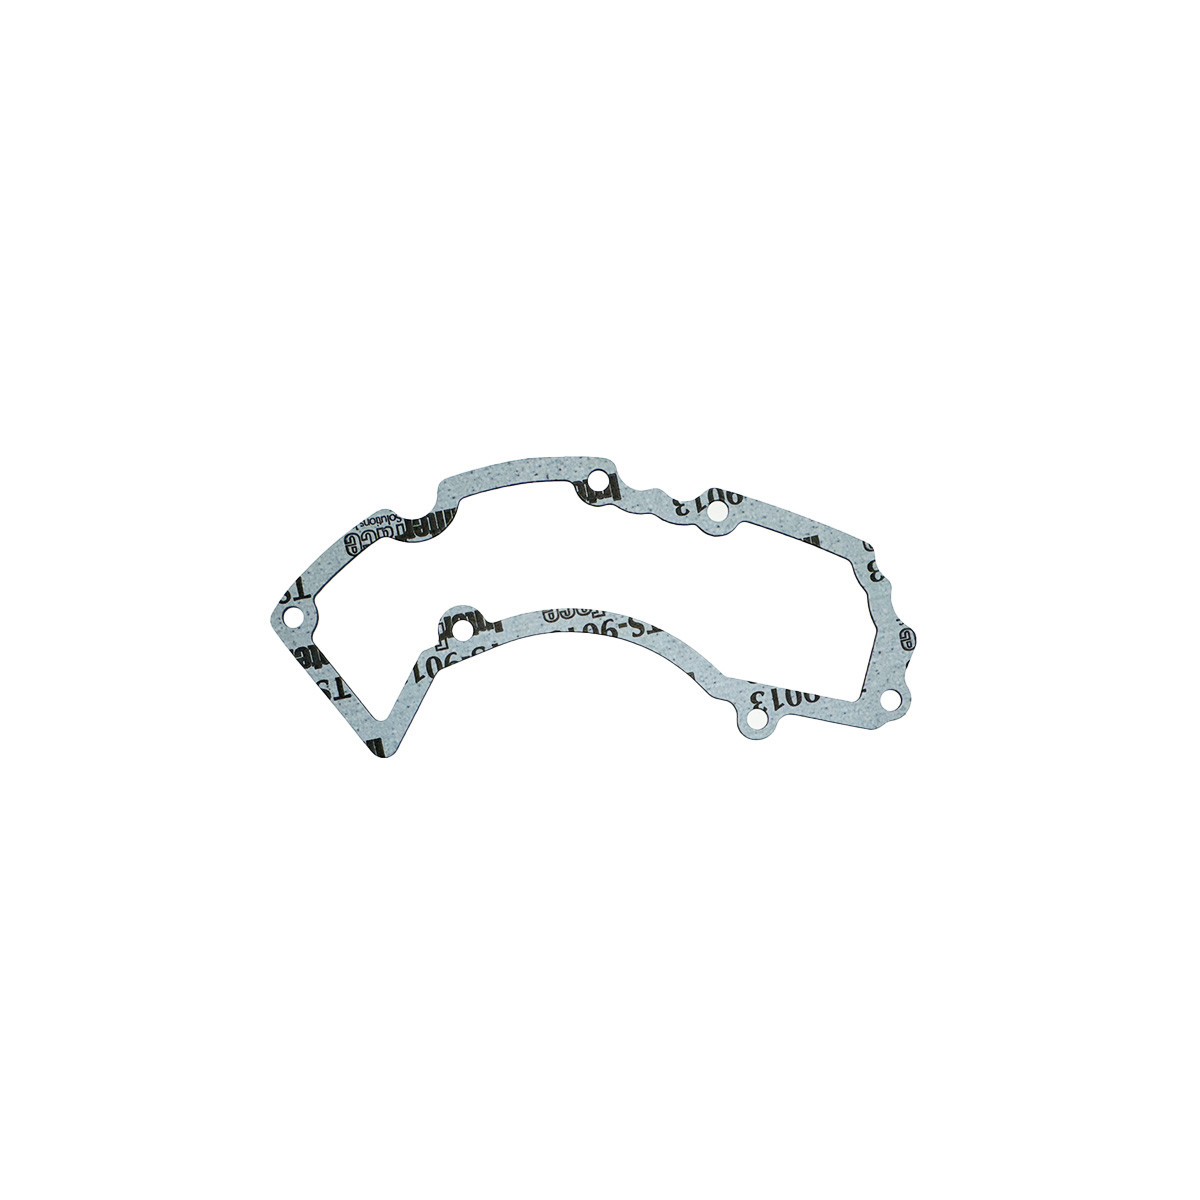 T1161037, Gasket, Breather Plate